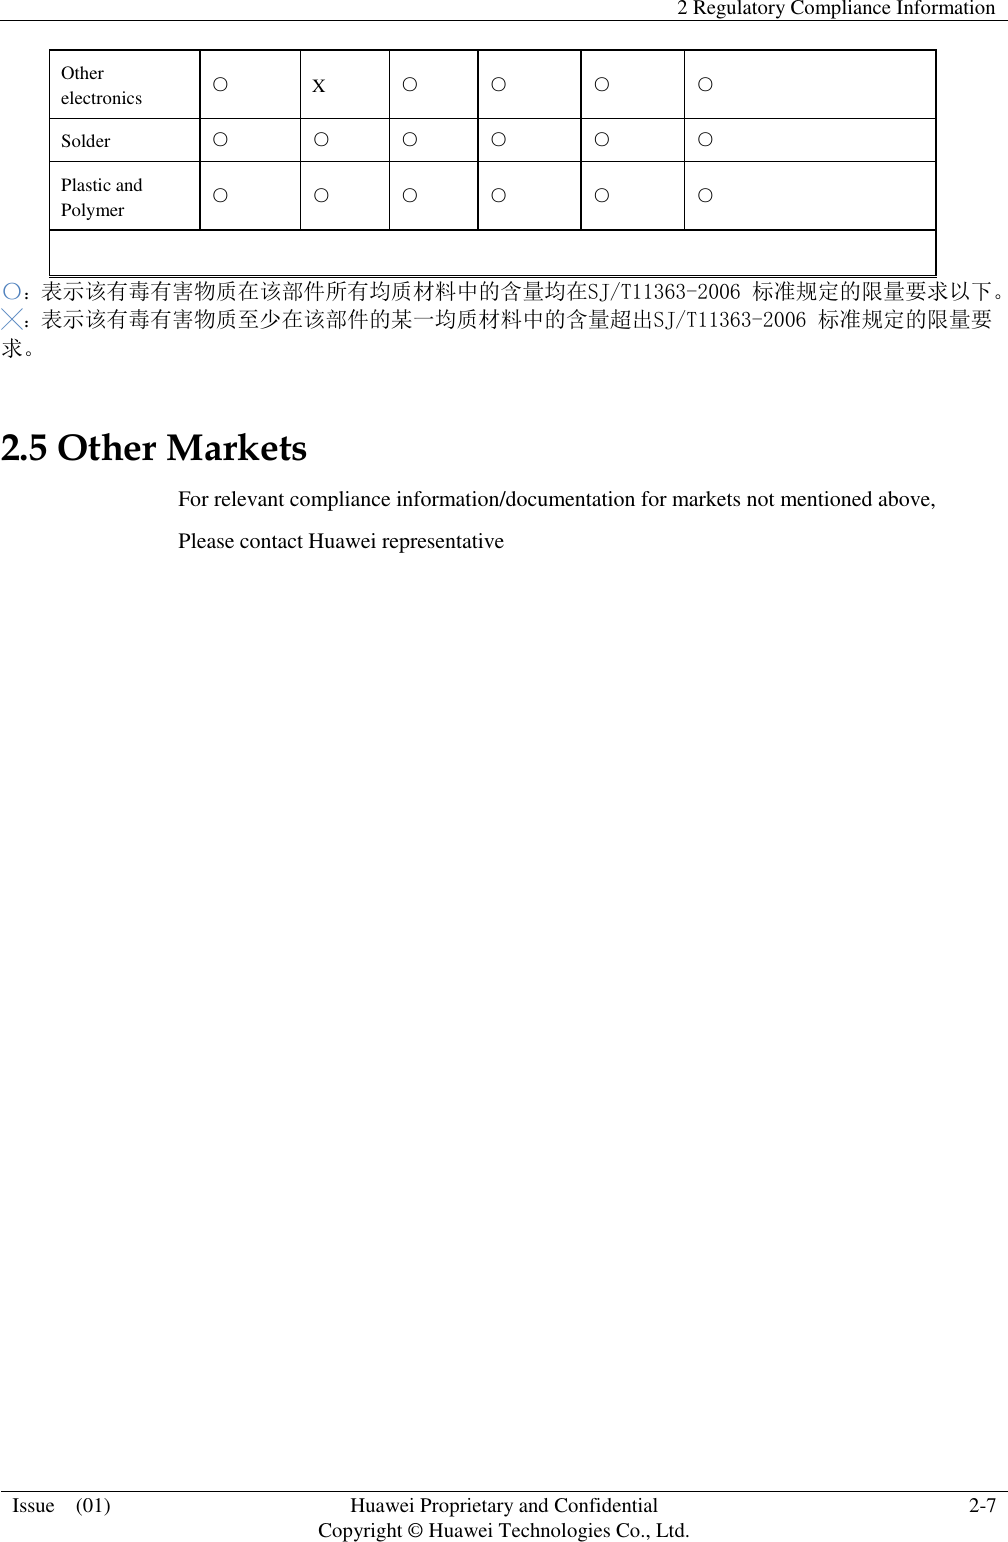   2 Regulatory Compliance Information  Issue    (01) Huawei Proprietary and Confidential                                     Copyright © Huawei Technologies Co., Ltd. 2-7  Other electronics ○ X ○ ○ ○ ○ Solder ○ ○ ○ ○ ○ ○ Plastic and Polymer ○ ○ ○ ○ ○ ○  〇：表示该有毒有害物质在该部件所有均质材料中的含量均在SJ/T11363-2006 标准规定的限量要求以下。 ╳：表示该有毒有害物质至少在该部件的某一均质材料中的含量超出SJ/T11363-2006 标准规定的限量要求。 2.5 Other Markets For relevant compliance information/documentation for markets not mentioned above, Please contact Huawei representative  